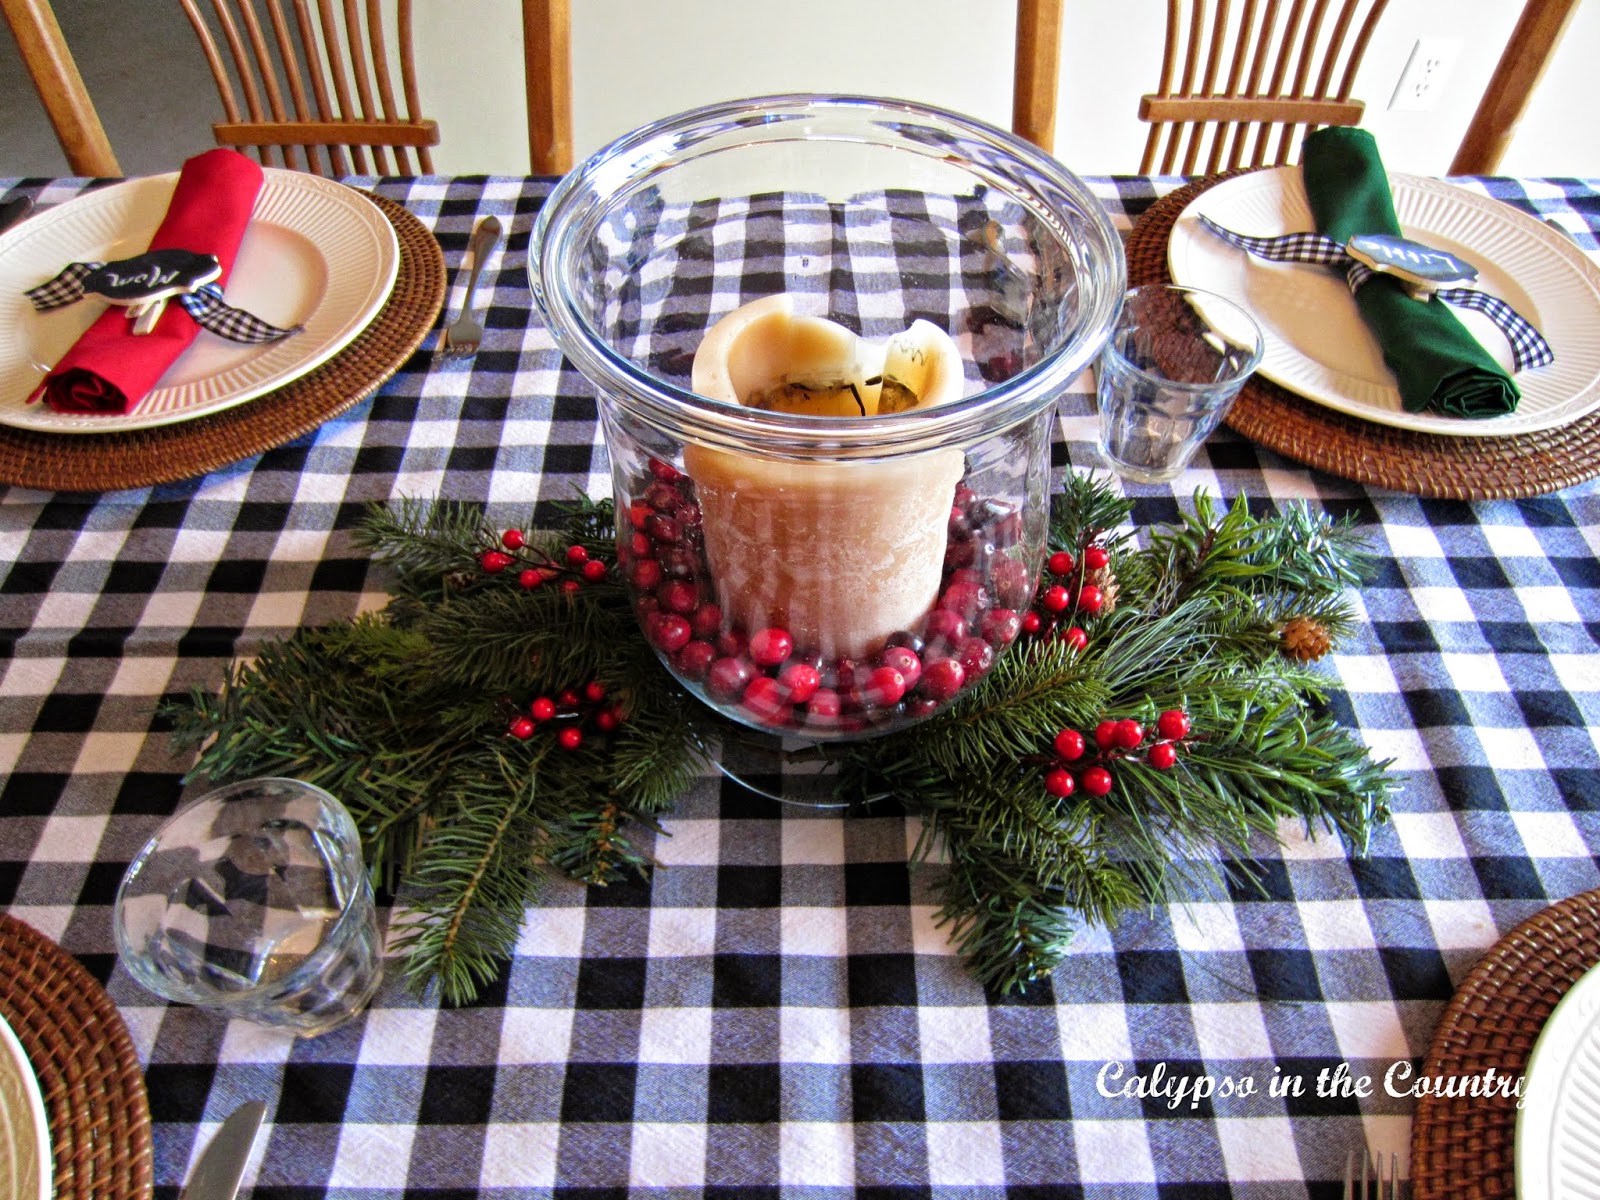 Christmas Table with Black and White - Plaid Table Setting Ideas